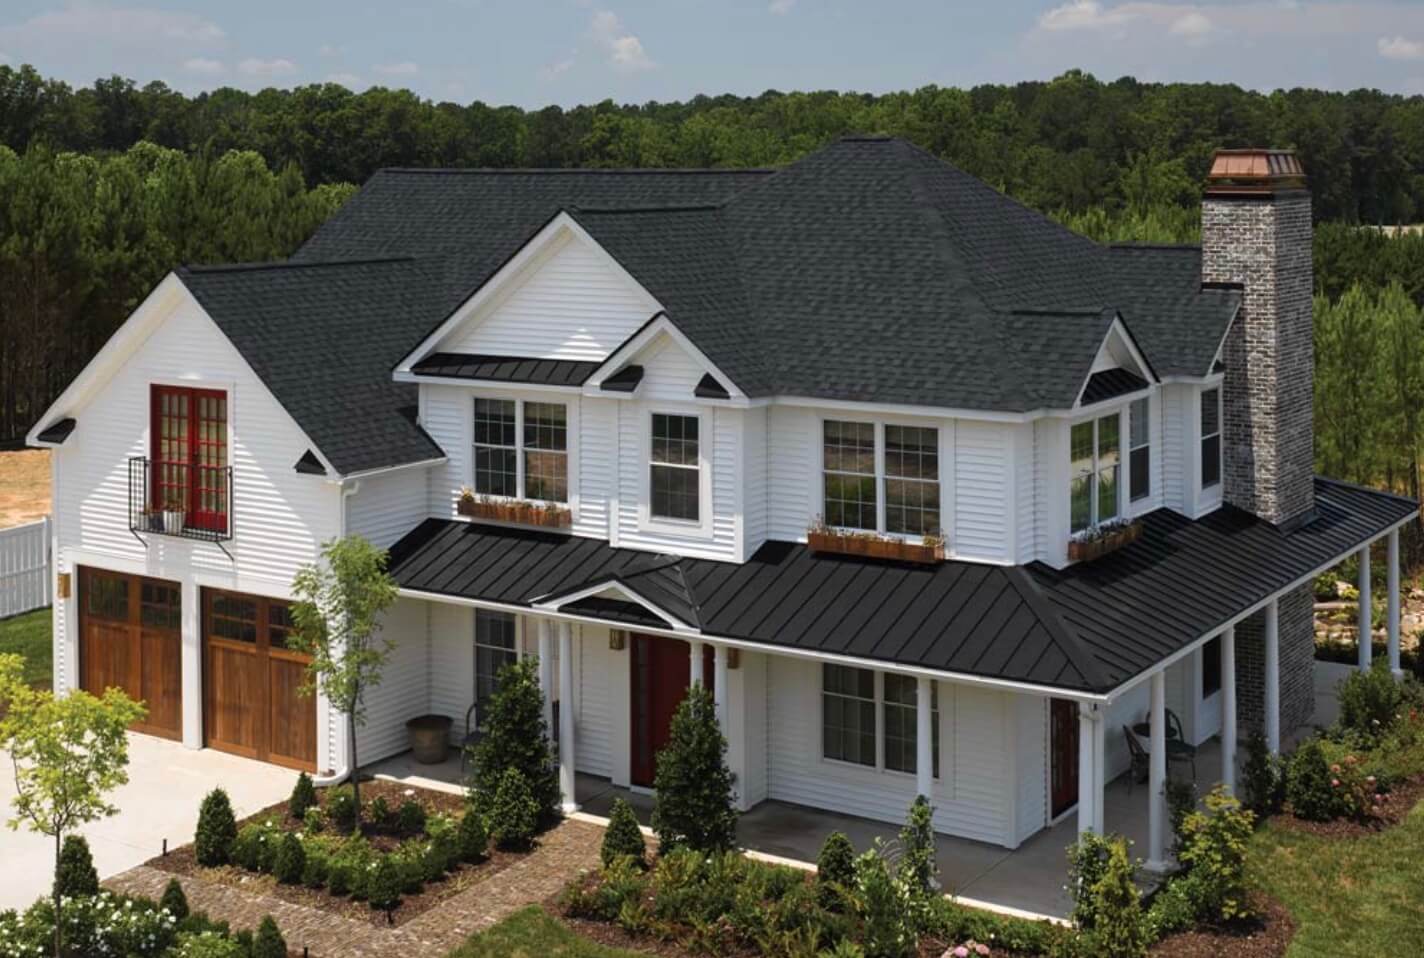 White two-story house with  black shingles and a one story wrap around porch with a metal roof